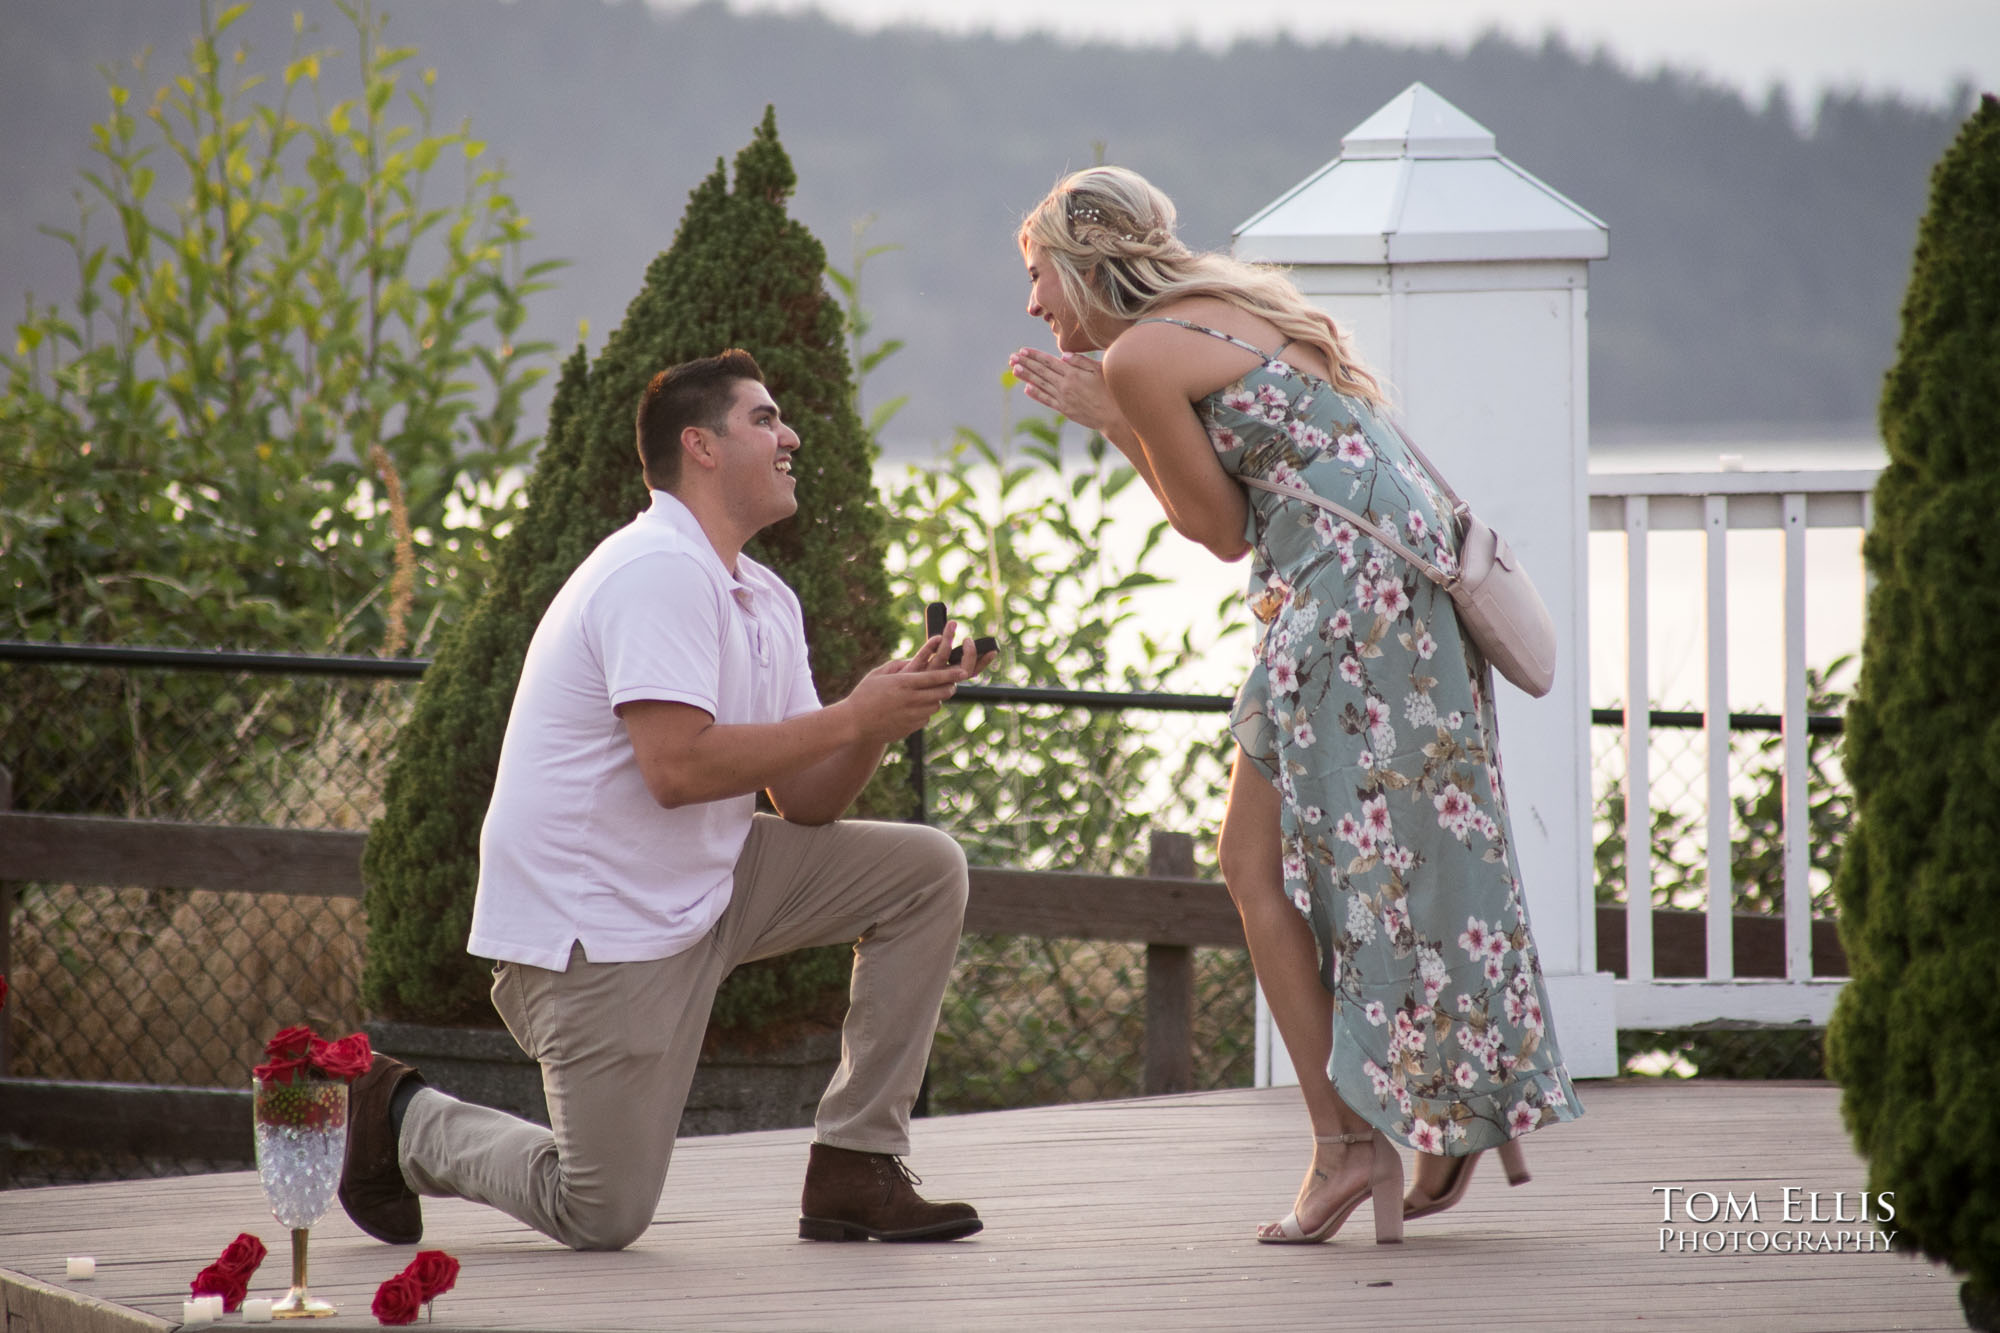 Alex takes a knee and shows the engagement ring as he proposes to Amy at Pioneer Orchard Park. Tom Ellis Photography, Seattle engagement photographer